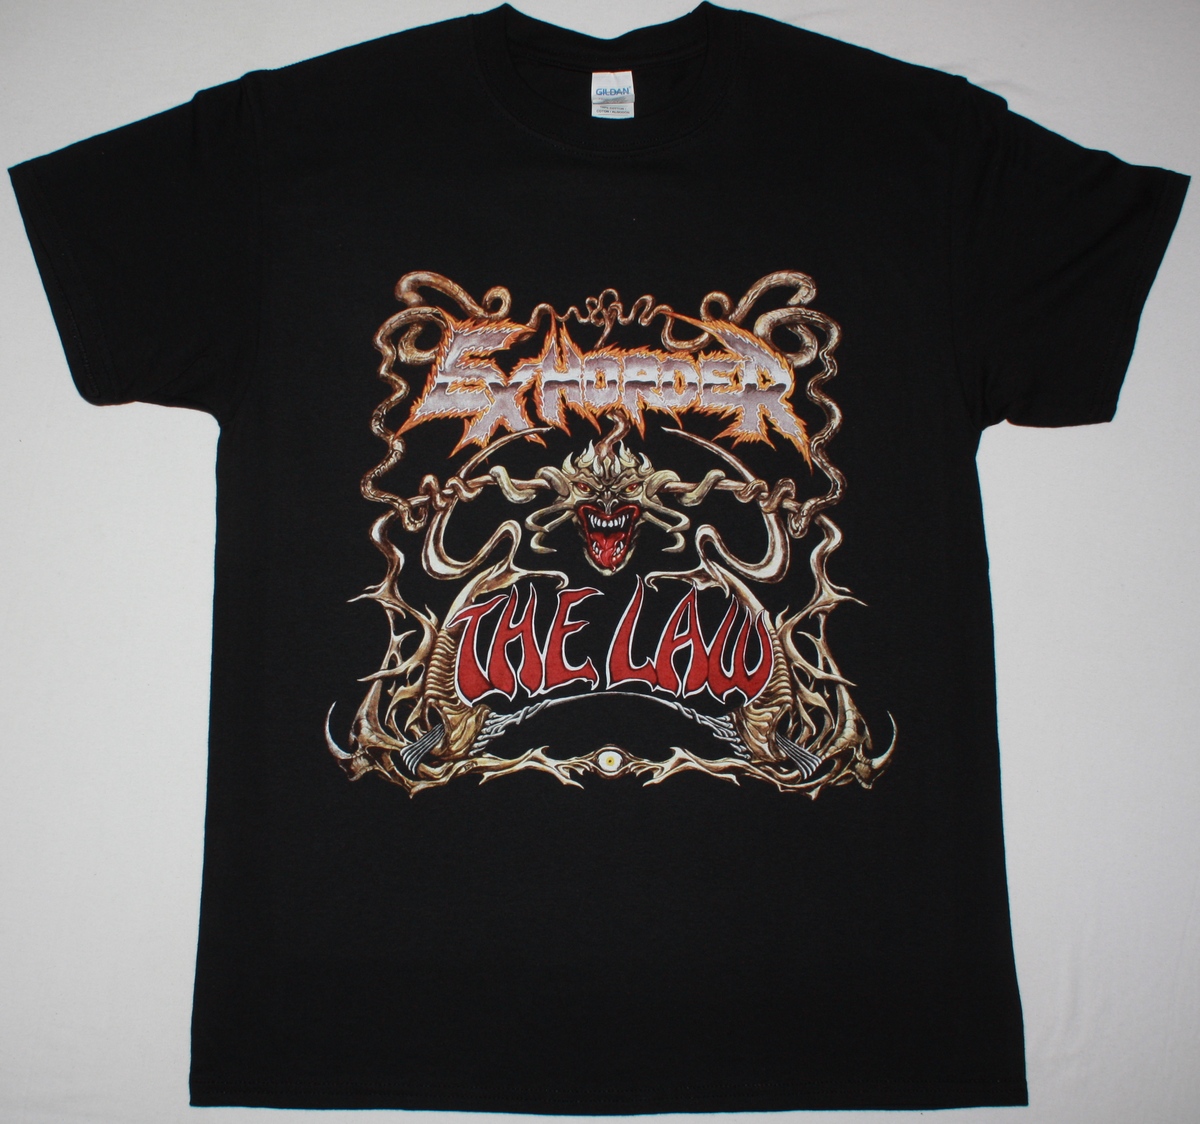 EXHORDER THE LAW NEW BLACK T-SHIRT - Best Rock T-shirts